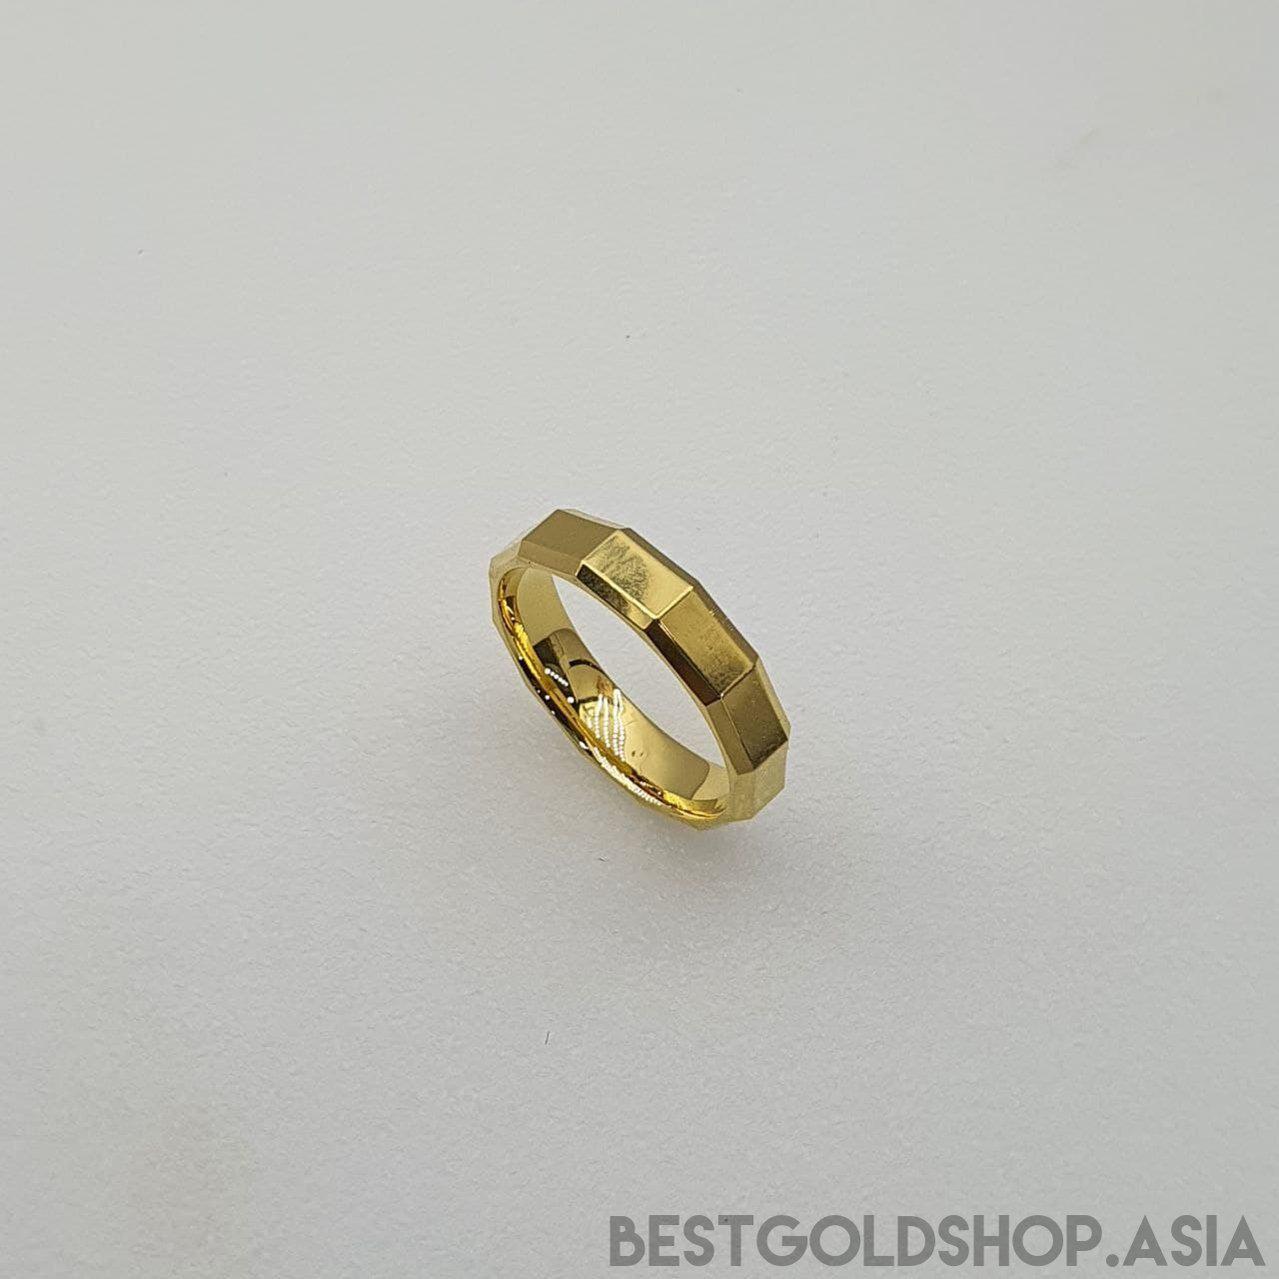 22k / 916 Gold Decagon Ring (smooth finish)-916 gold-Best Gold Shop